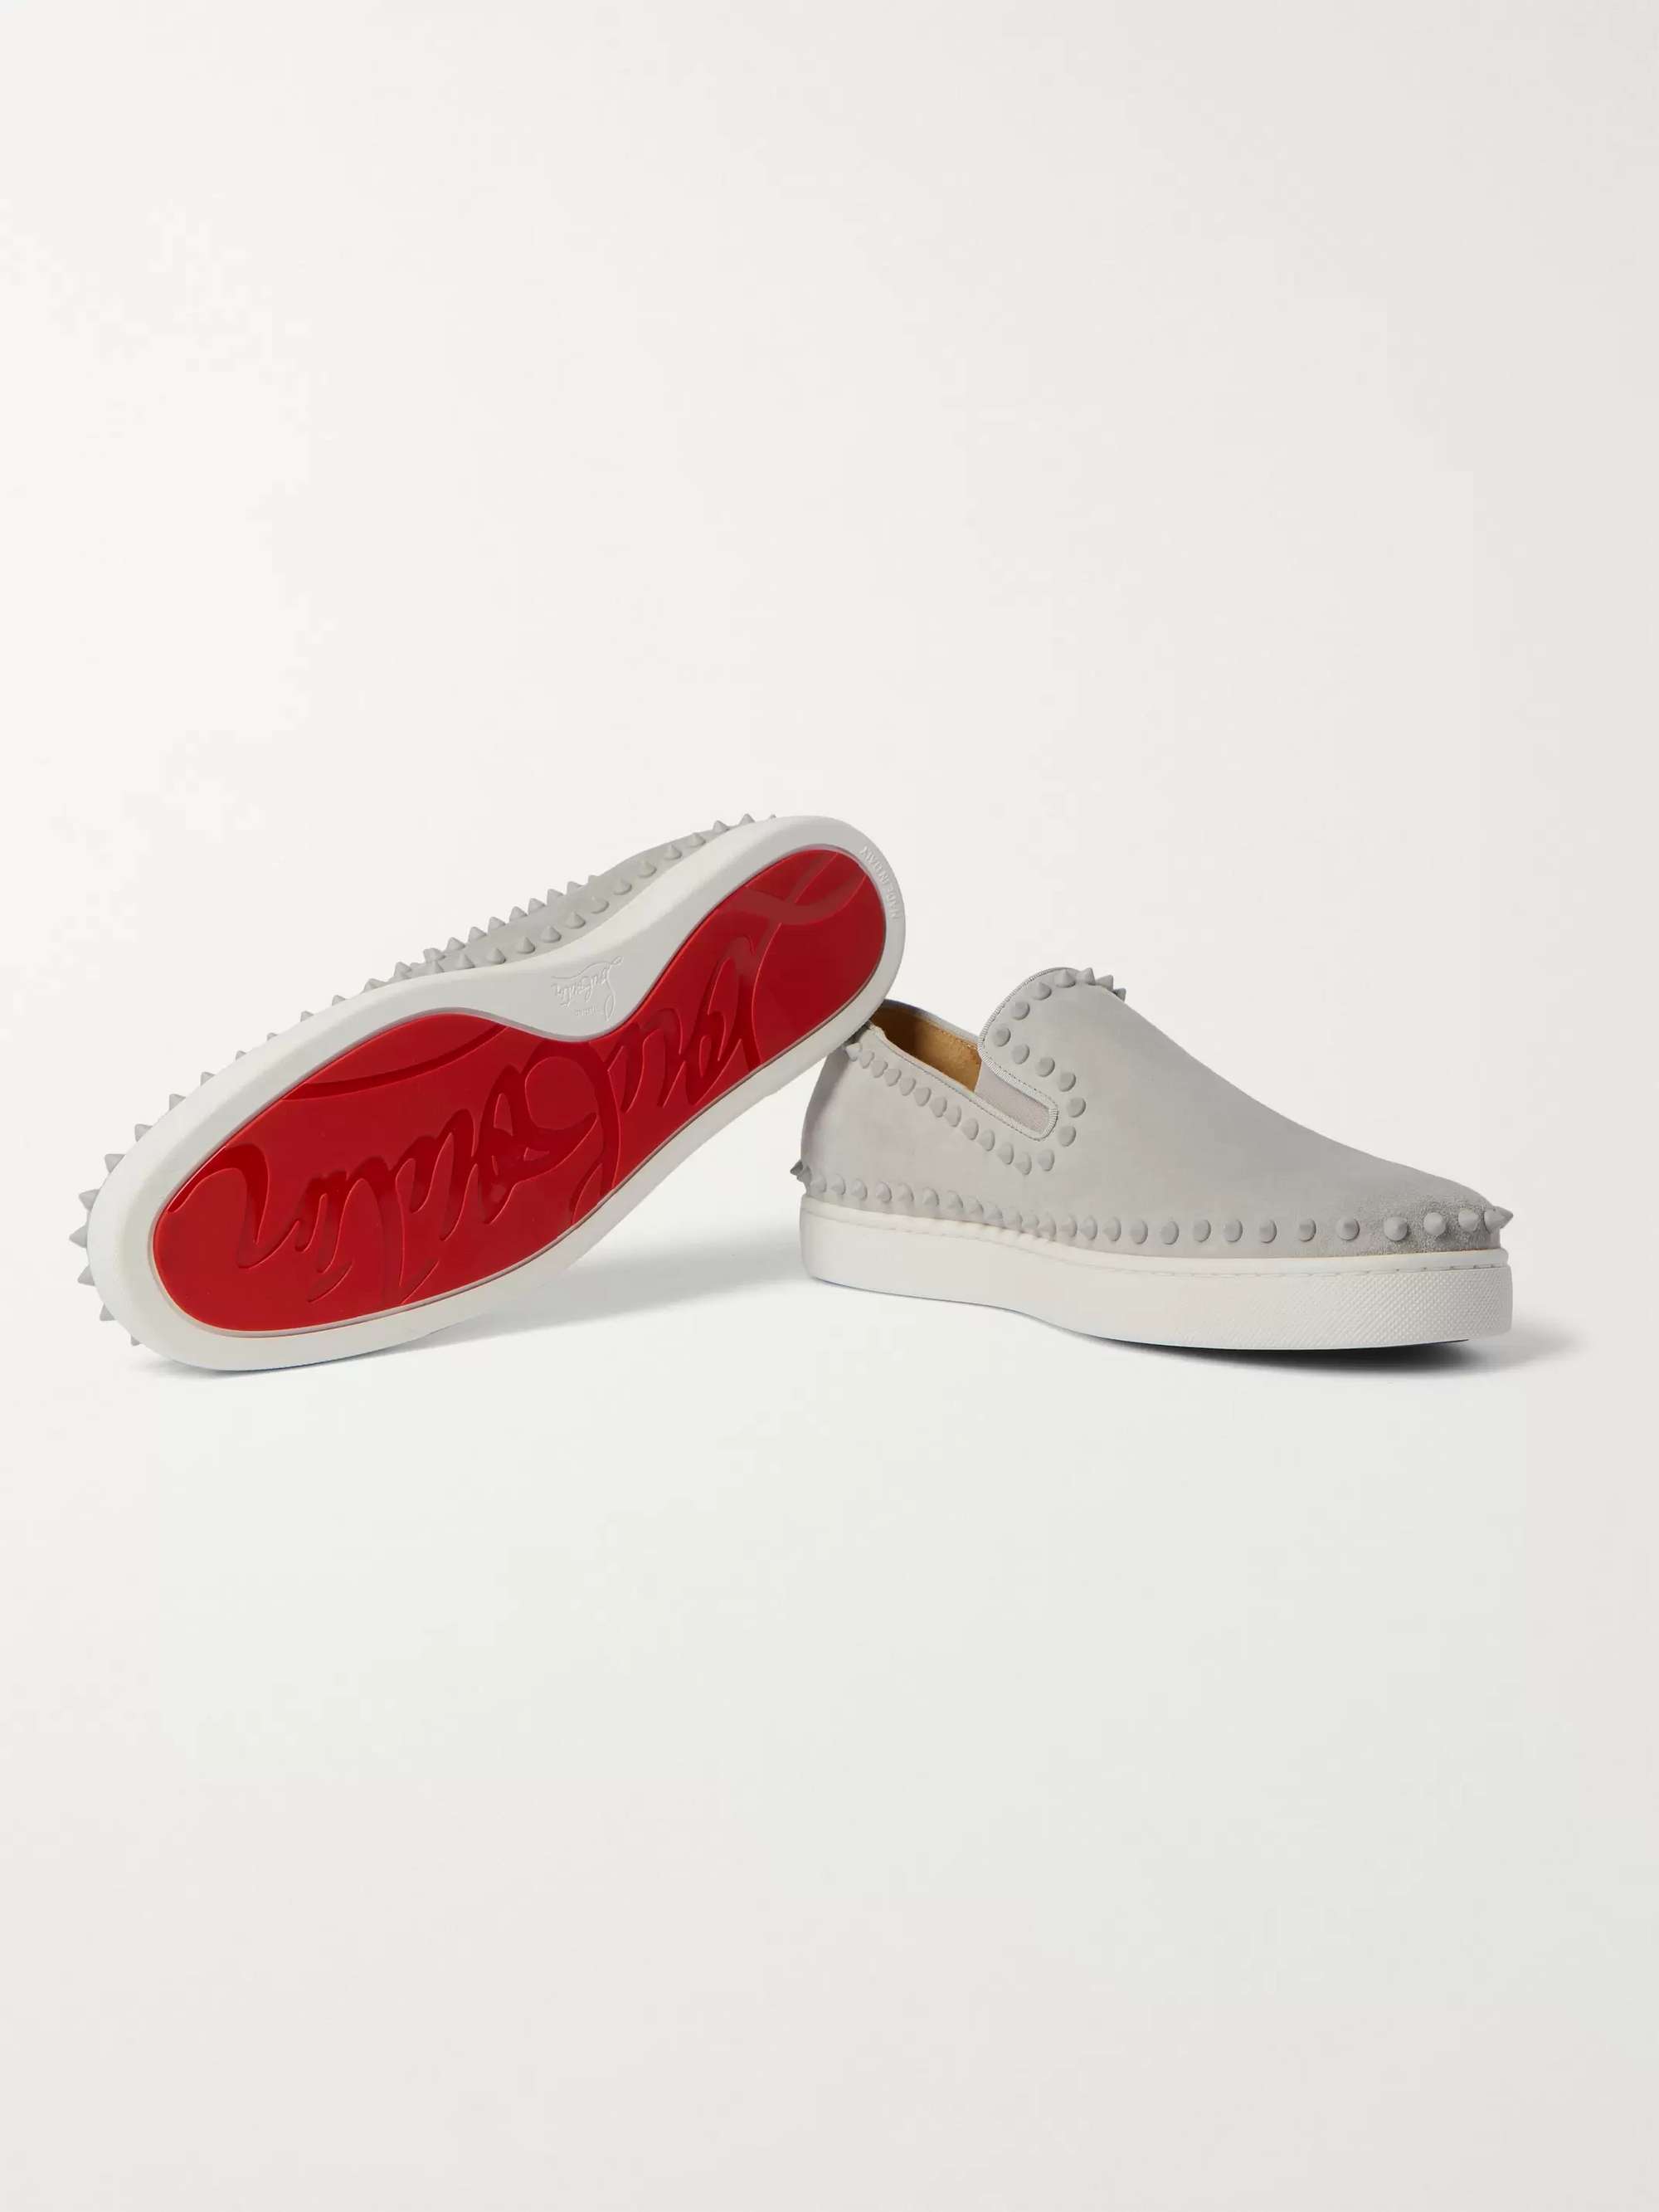 CHRISTIAN LOUBOUTIN Pik Boat Studded Suede Slip-On Sneakers